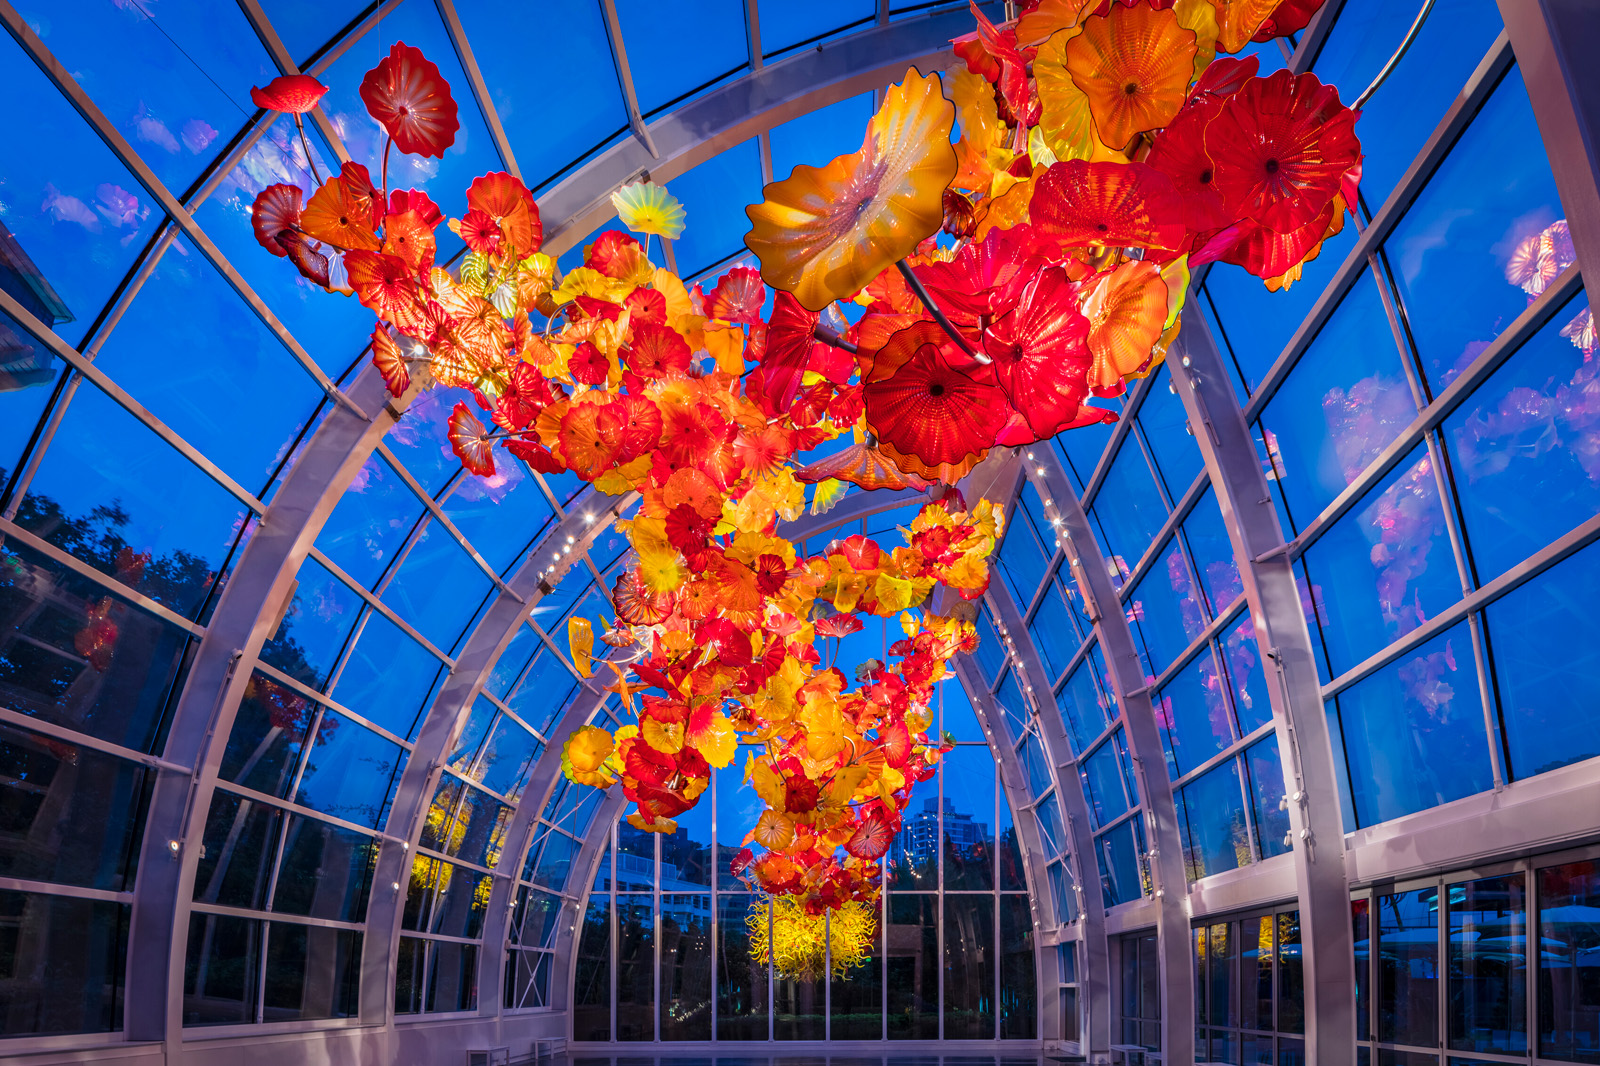 Dale Chihuly, Glasshouse Sculpture, 2012